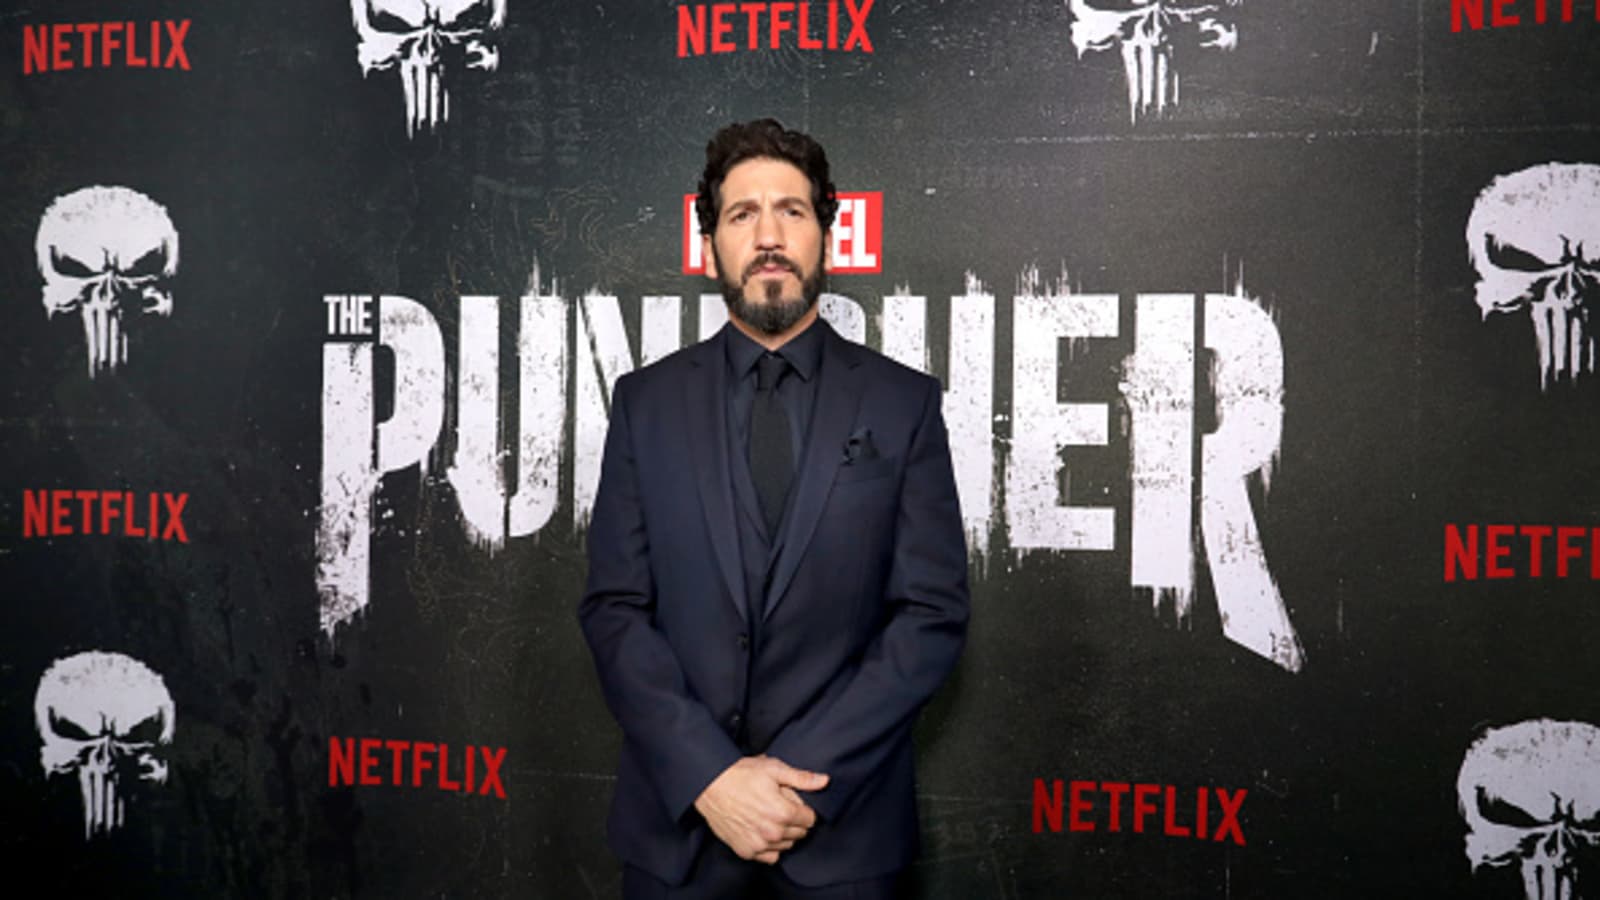 Netflix Cancels Marvel Shows The Punisher And Jessica Jones